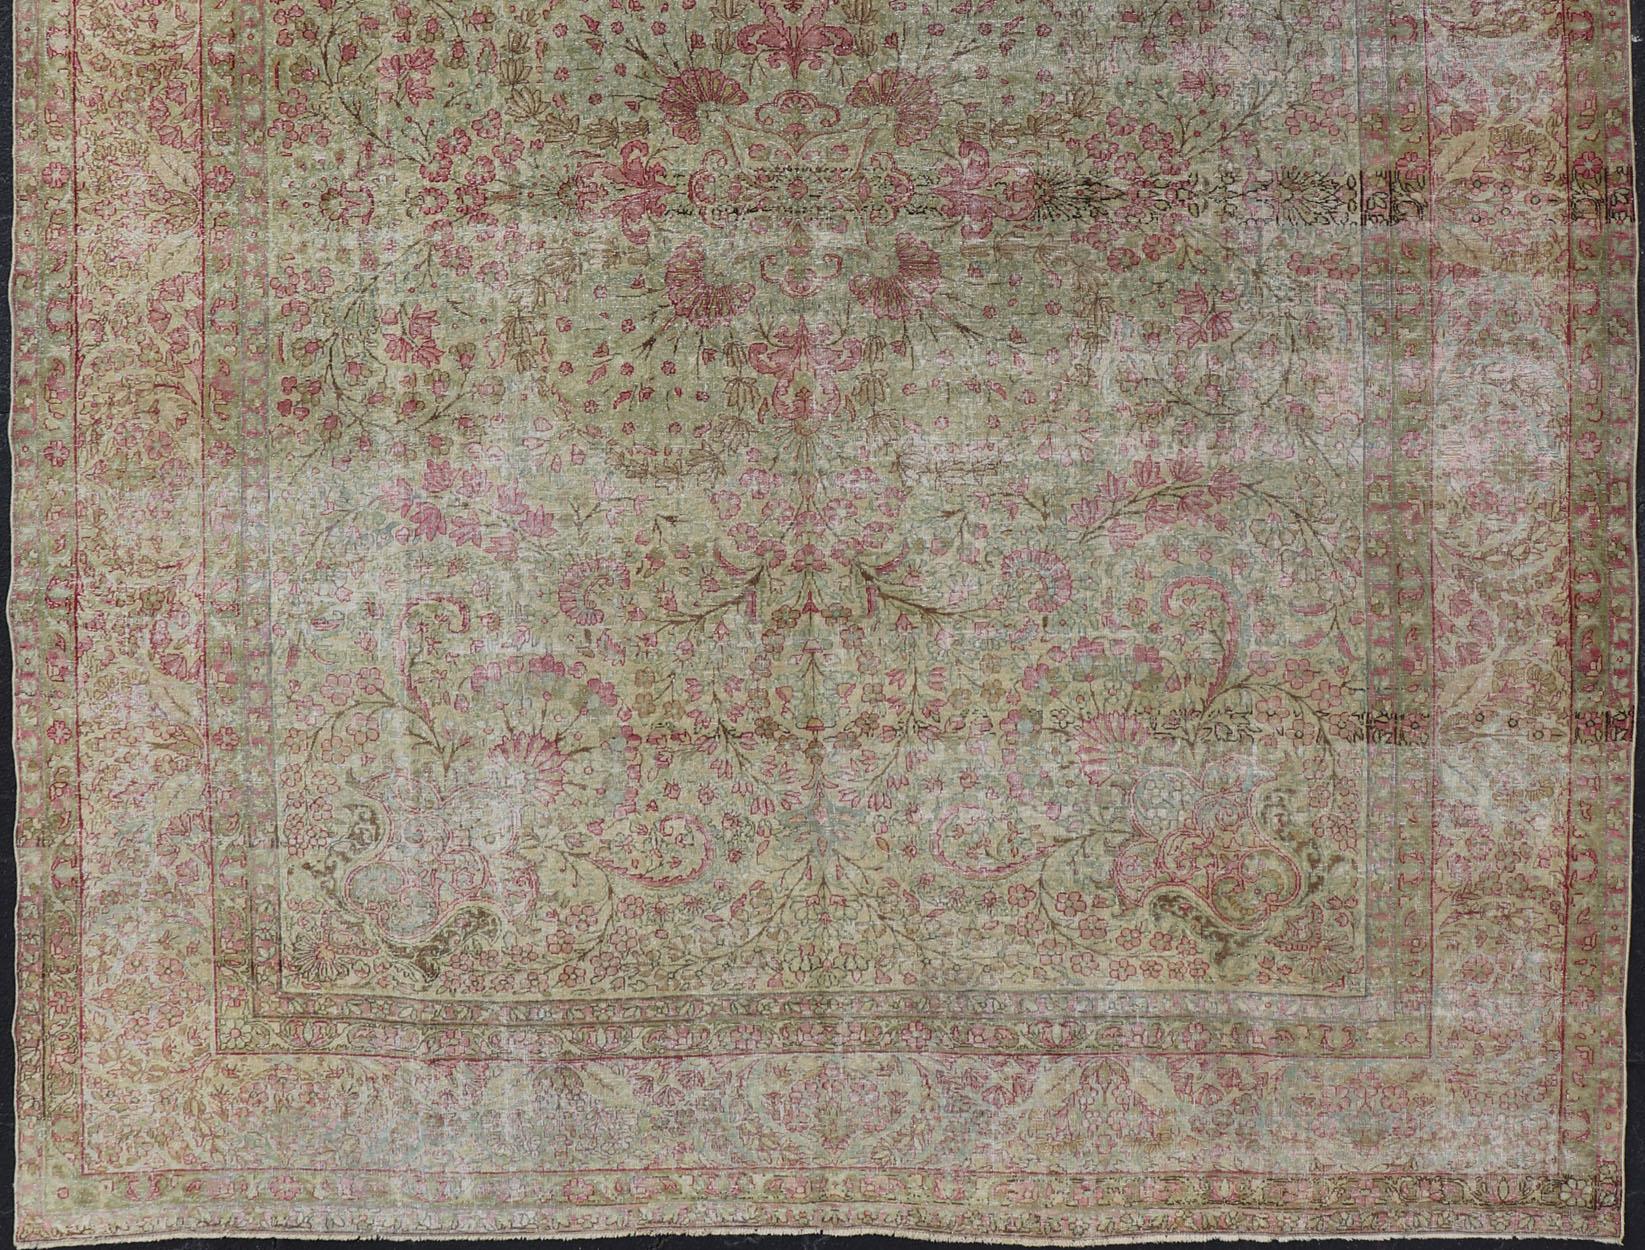 Antique Persian Lavar Kerman distressed rug with multicolored floral motifs, keivan Woven Arts/ rug/D-1210, Country/Iran, 
This beautiful antique distressed Persian Kerman Lavar rug from the early 20th century features very pale yellow green tone